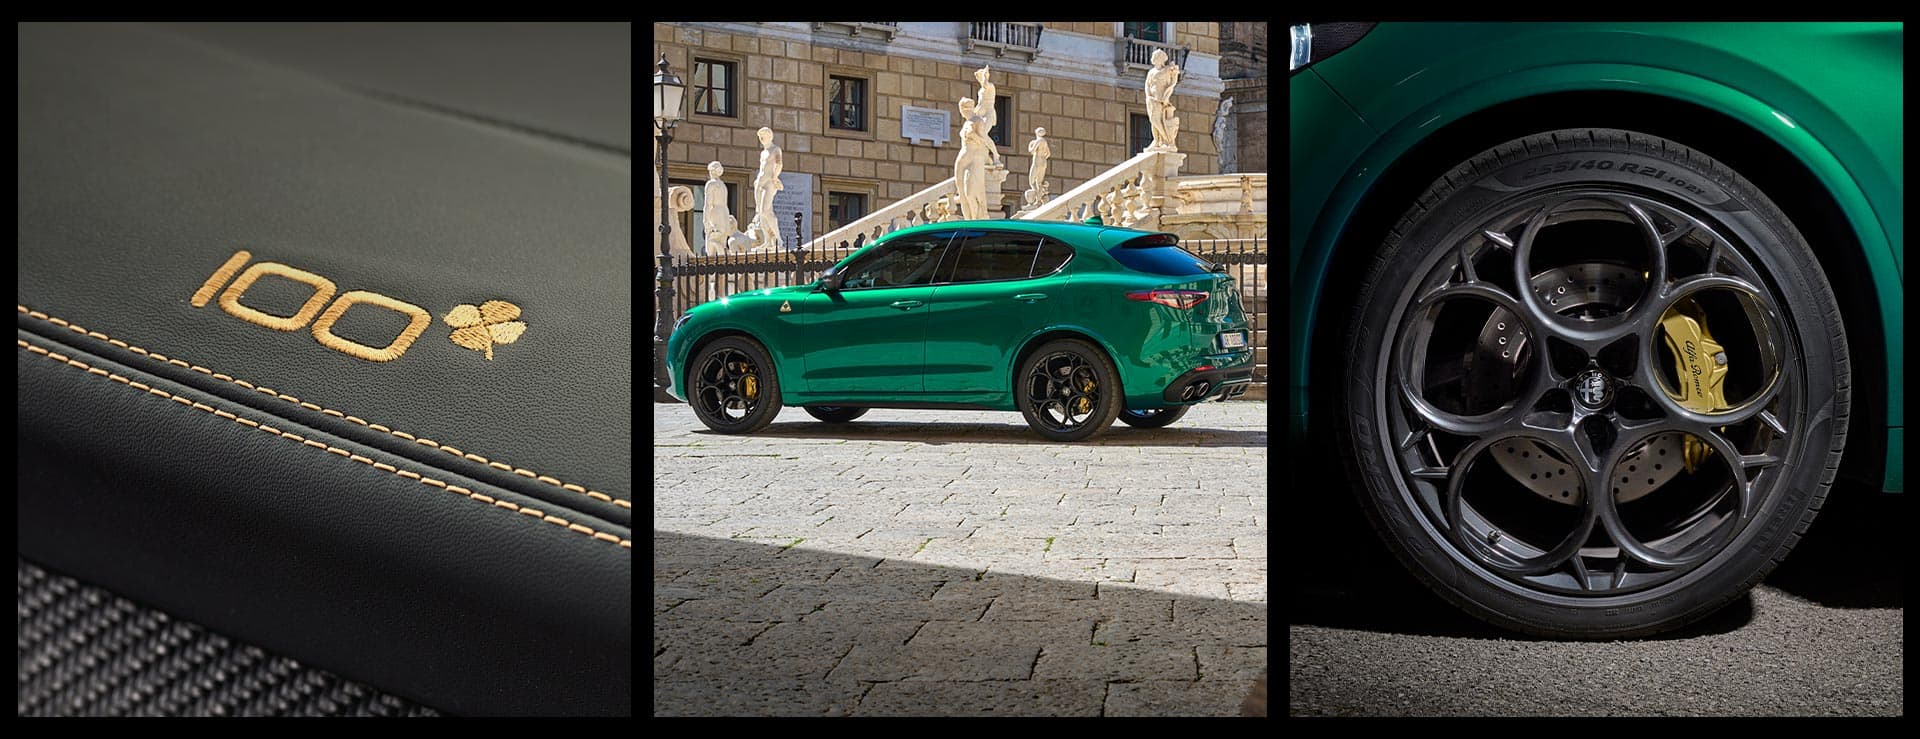 A close-up of the 100th Anniversary gold stitching on the seat in the 2024 Alfa Romeo Stelvio Quadrifoglio 100th Anniversary Edition. A driver-side profile of a green 2024 Alfa Romeo Stelvio Quadrifoglio 100th Anniversary Edition parked in a brick courtyard, with ornate statues in the background. A close-up of a wheel and tire on  the 2024 Alfa Romeo Stelvio Quadrifoglio 100th Anniversary Edition.